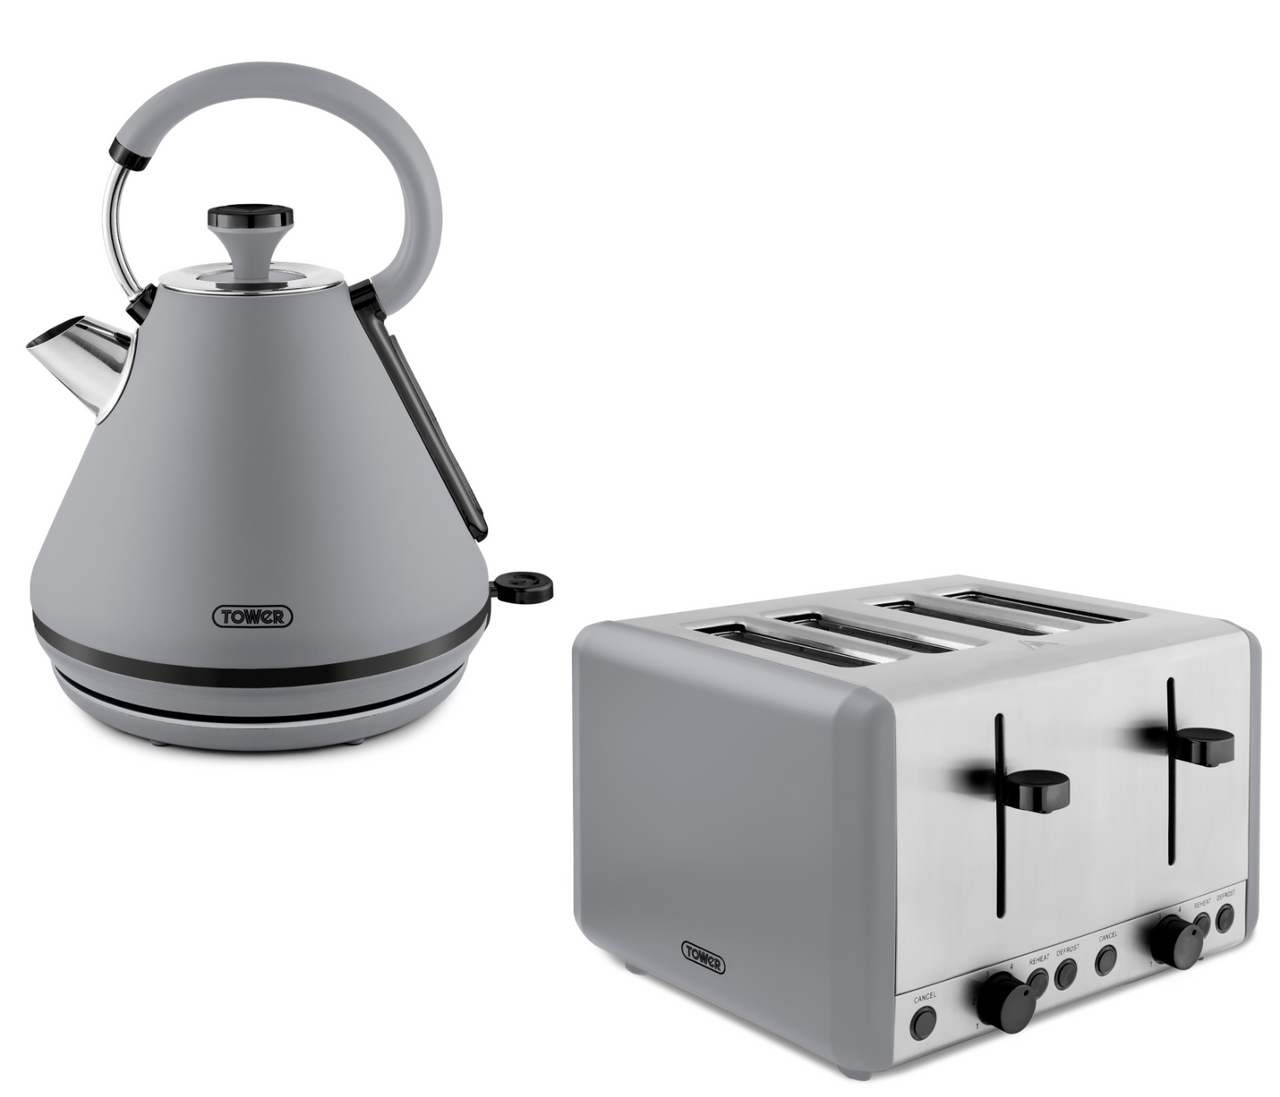 Tower Sera Pyramid Kettle & 4 Slice Toaster Matching Set in Grey with Black Trim